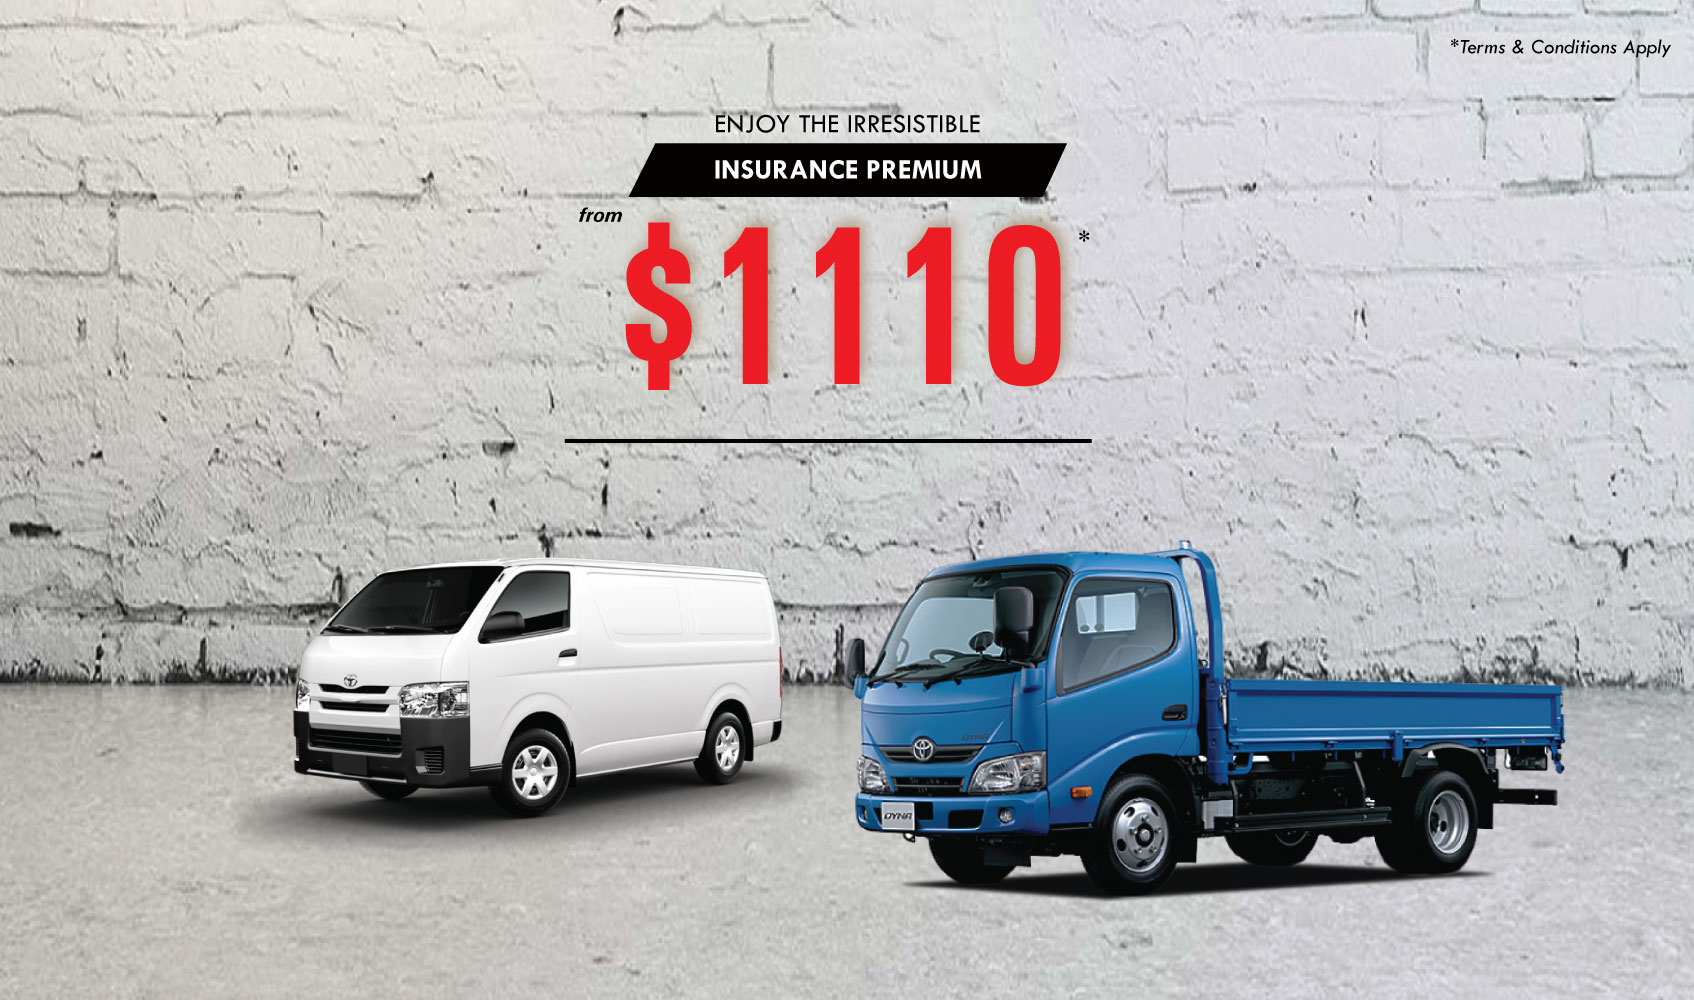 Insurance Promotion For Commercial Vehicle